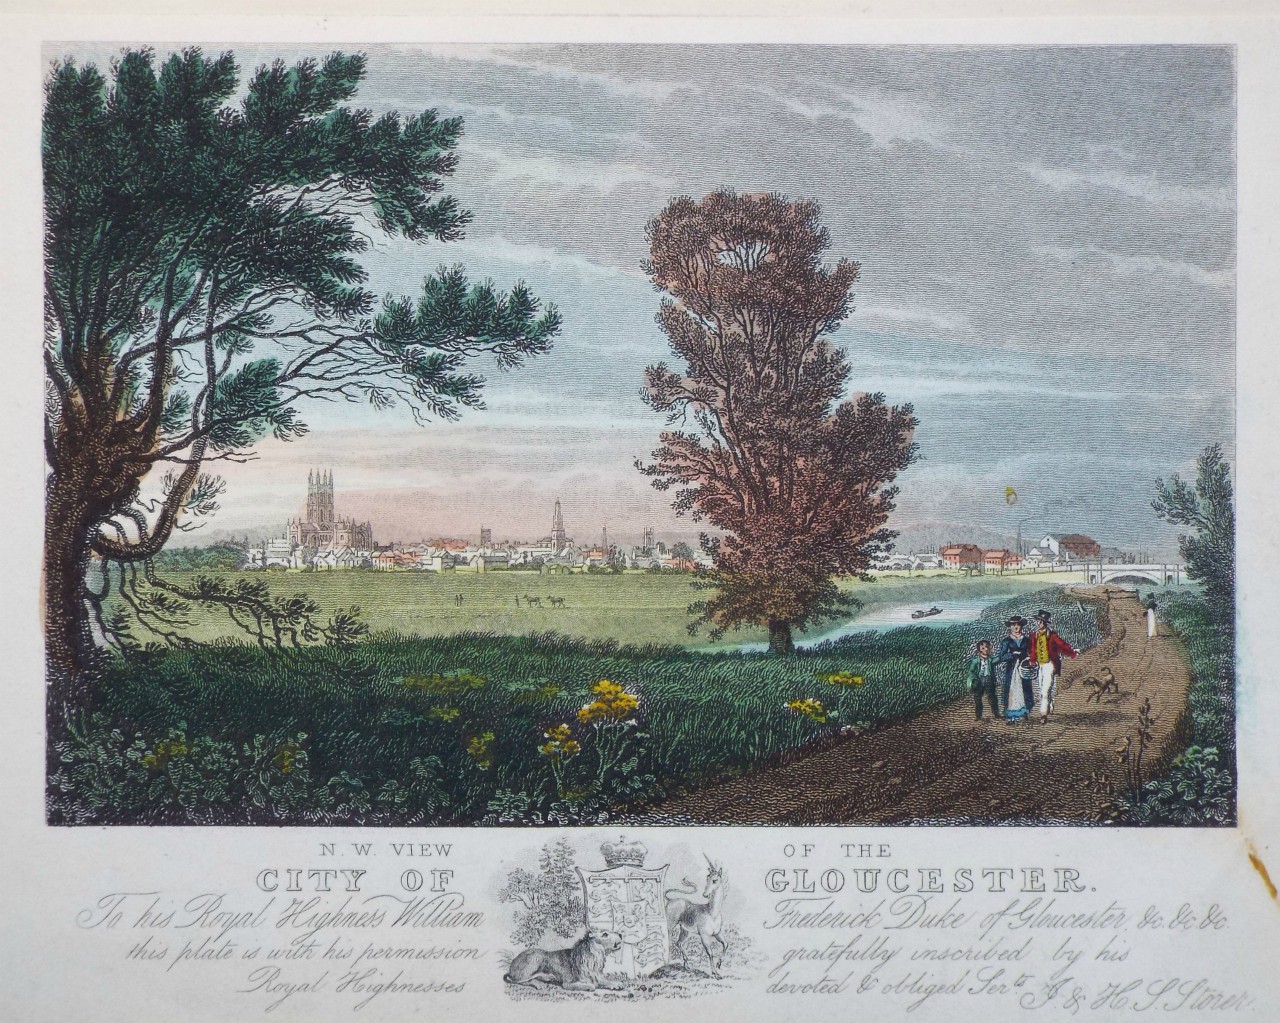 Print - N.W. View. of the City of Gloucester. - Storer